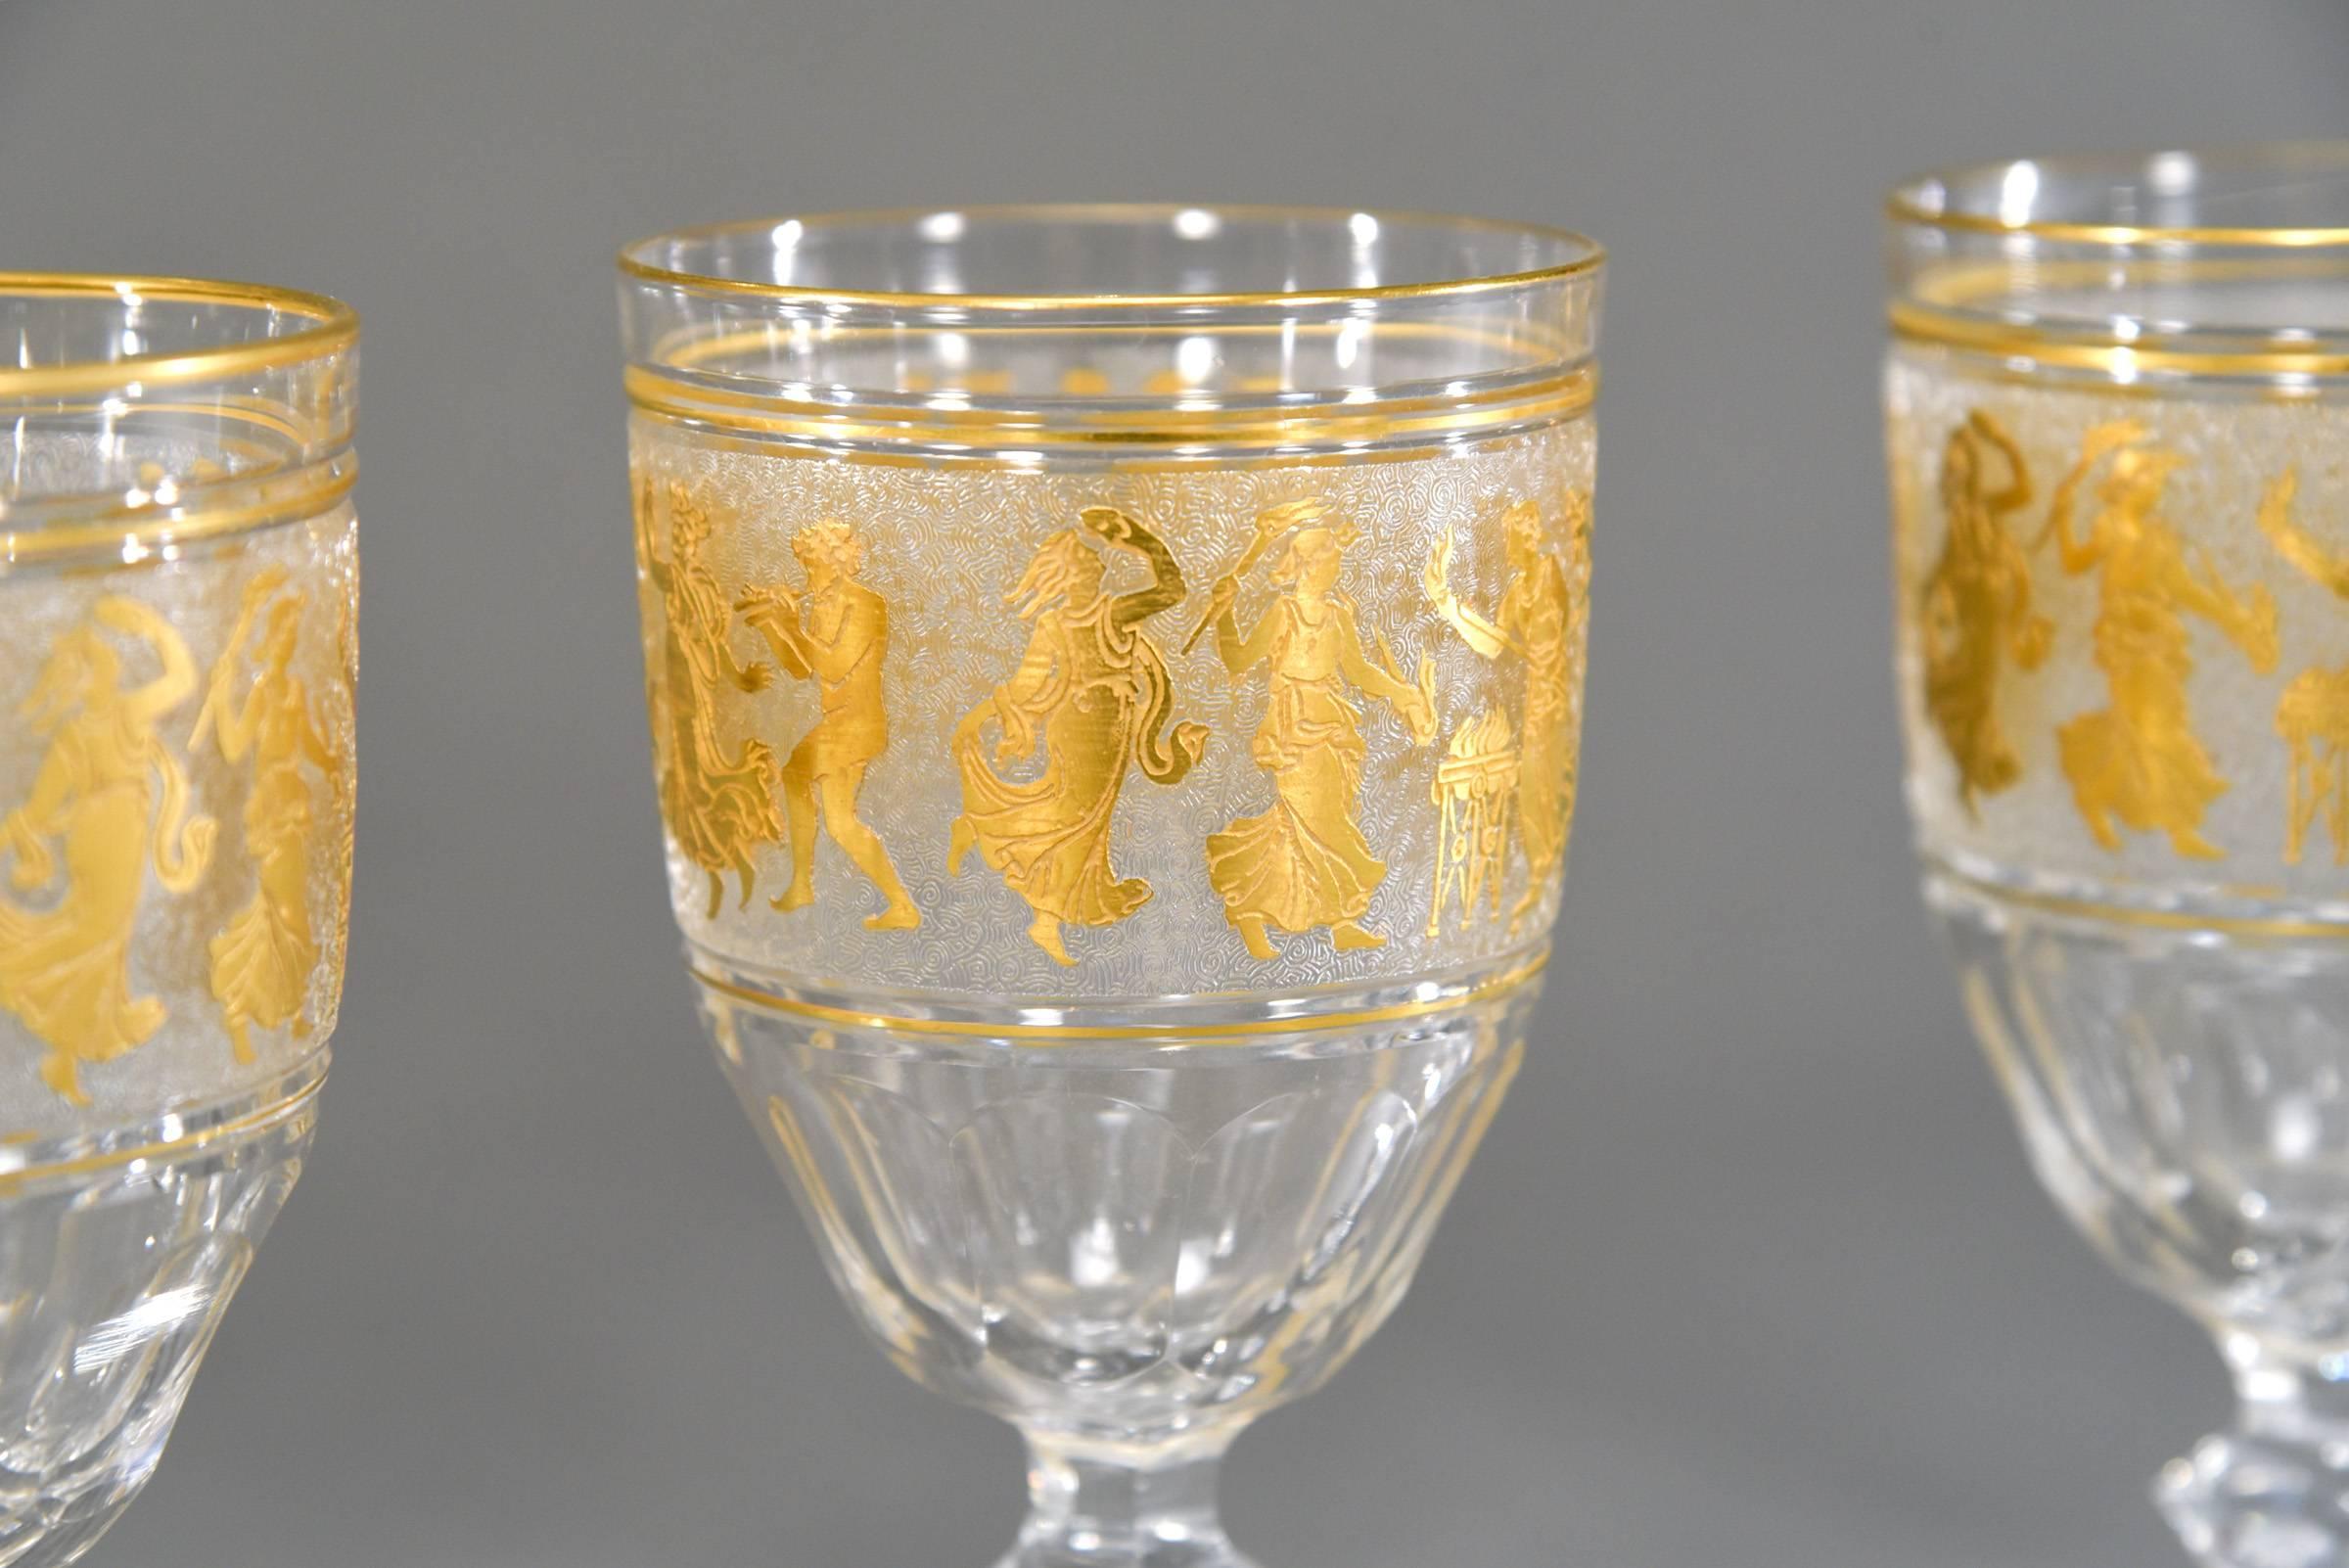 Set of 12 Val St. Lambert Handblown Crystal Cameo Goblets with Gold Roman Motifs In Excellent Condition For Sale In Great Barrington, MA